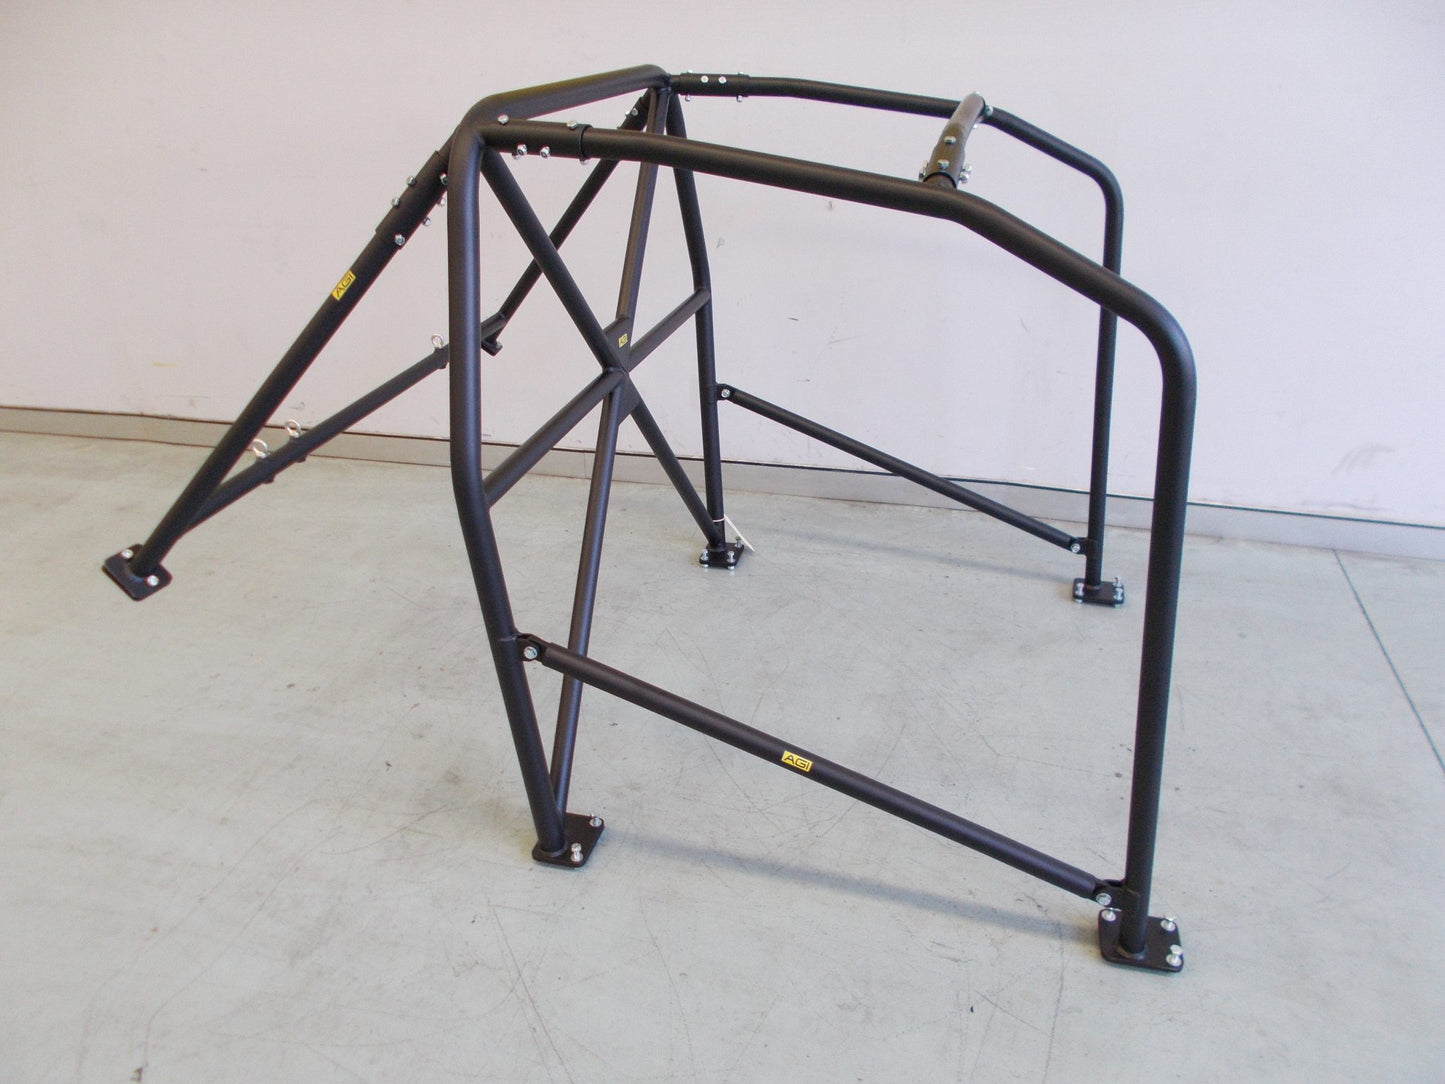 AGI roll cage VW GOLF MK5 – FULL CAGE 6PT BOLT IN (state level meetings)